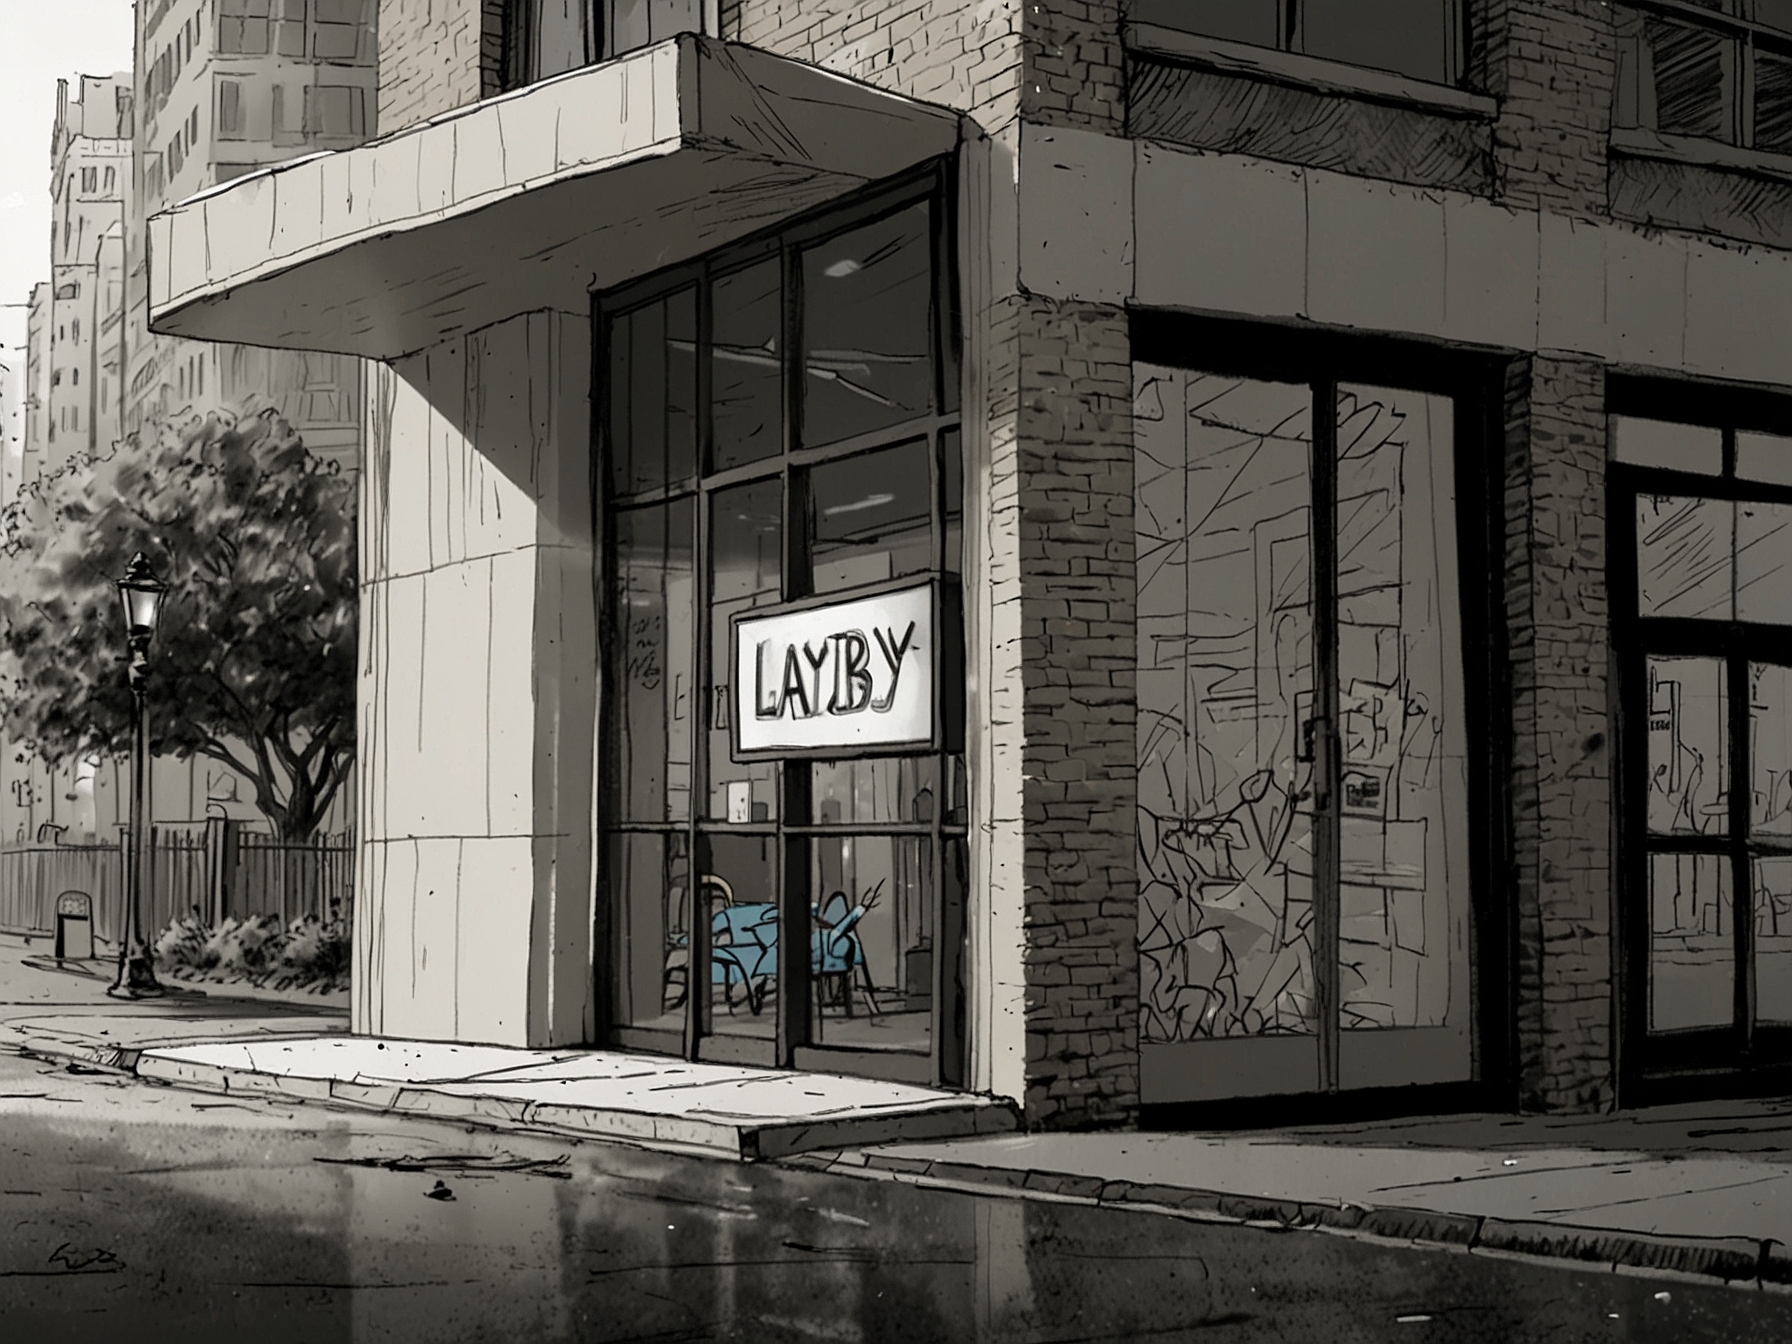 An image of Laybuy’s headquarters with a closed sign, symbolizing the company's financial struggles and its recent placement into receivership.